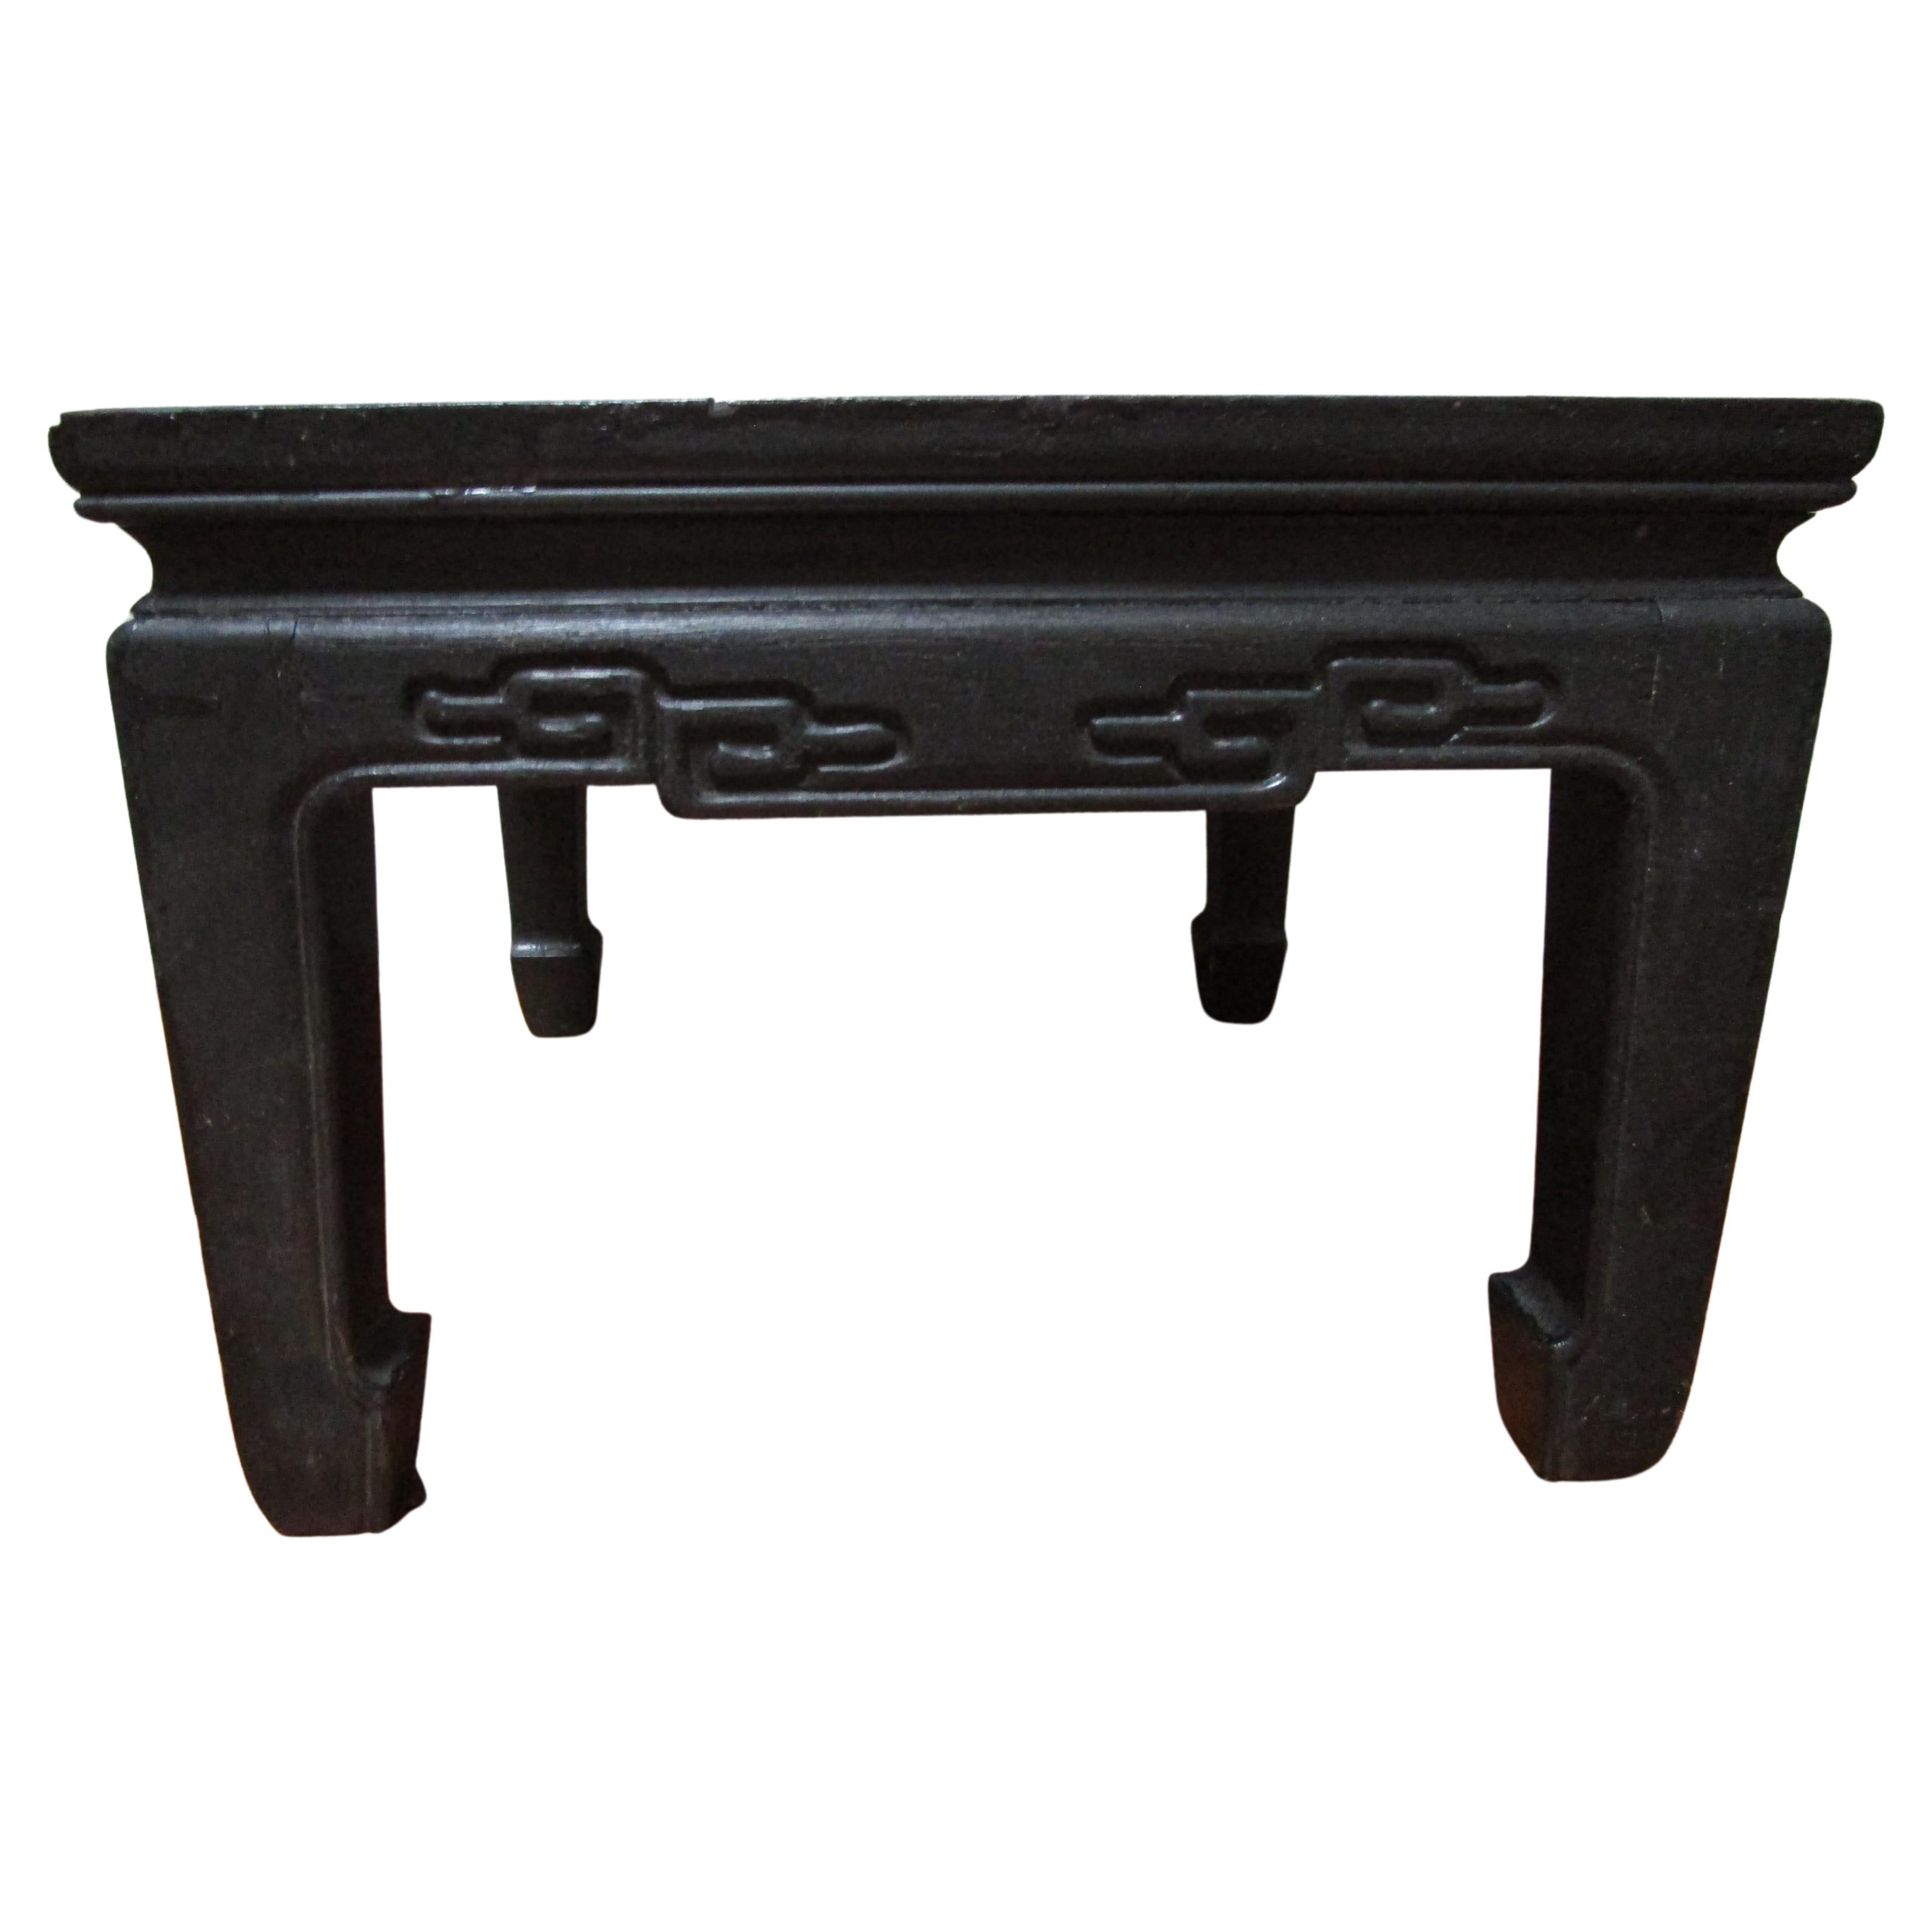 Mid-20th Century Black Wood Foot Rest or Low Side Table with Turned Ming Feet For Sale